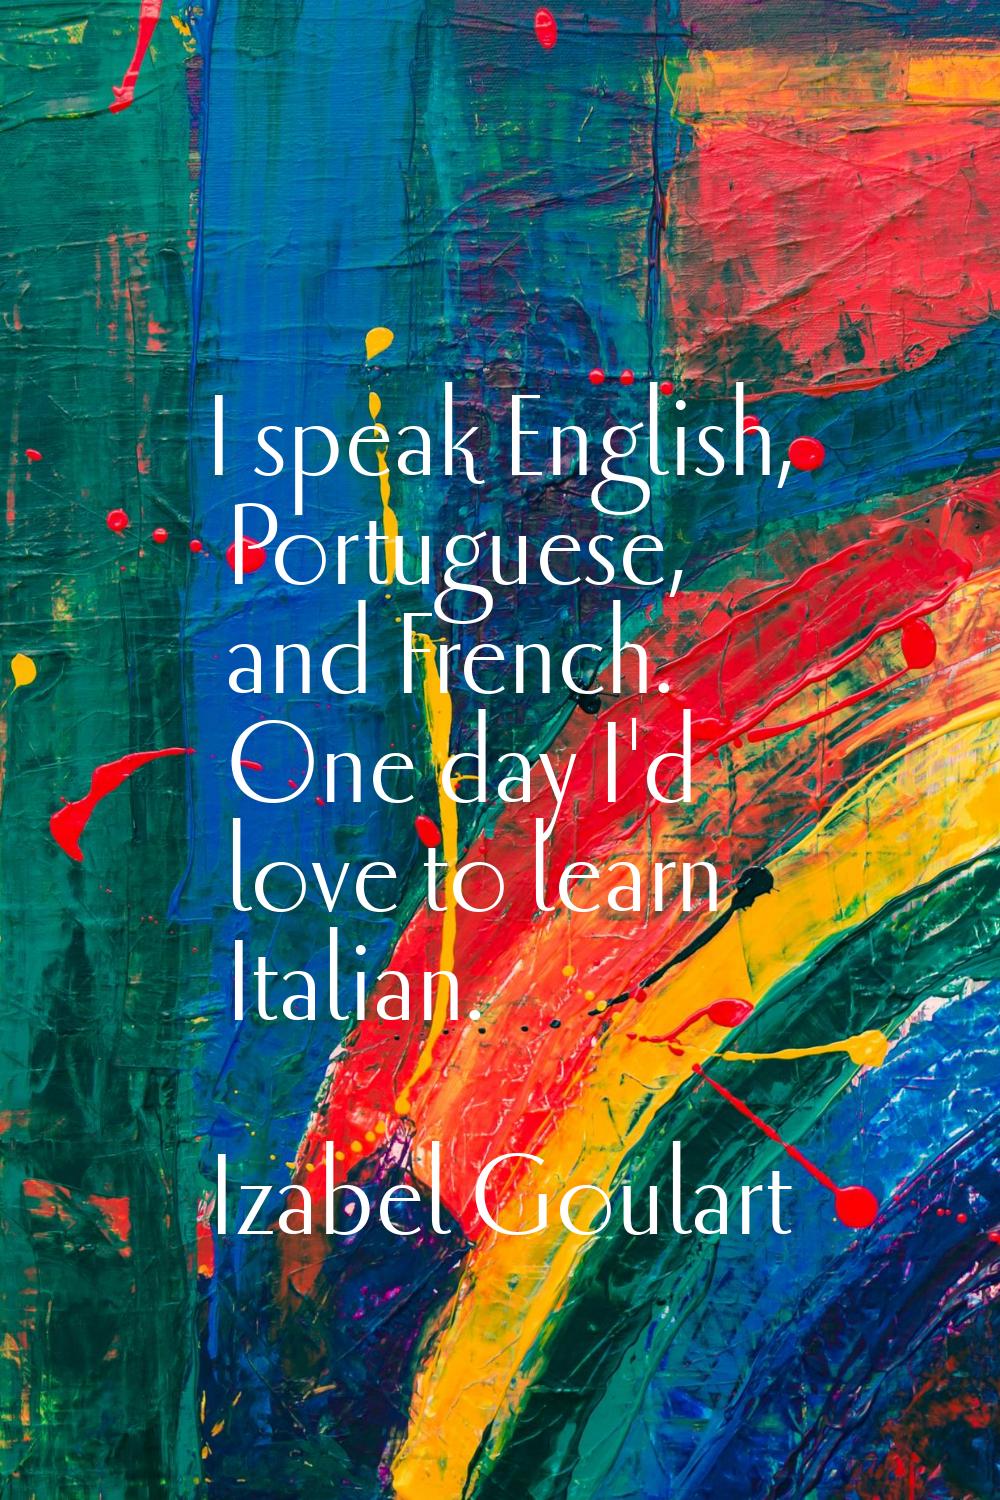 I speak English, Portuguese, and French. One day I'd love to learn Italian.